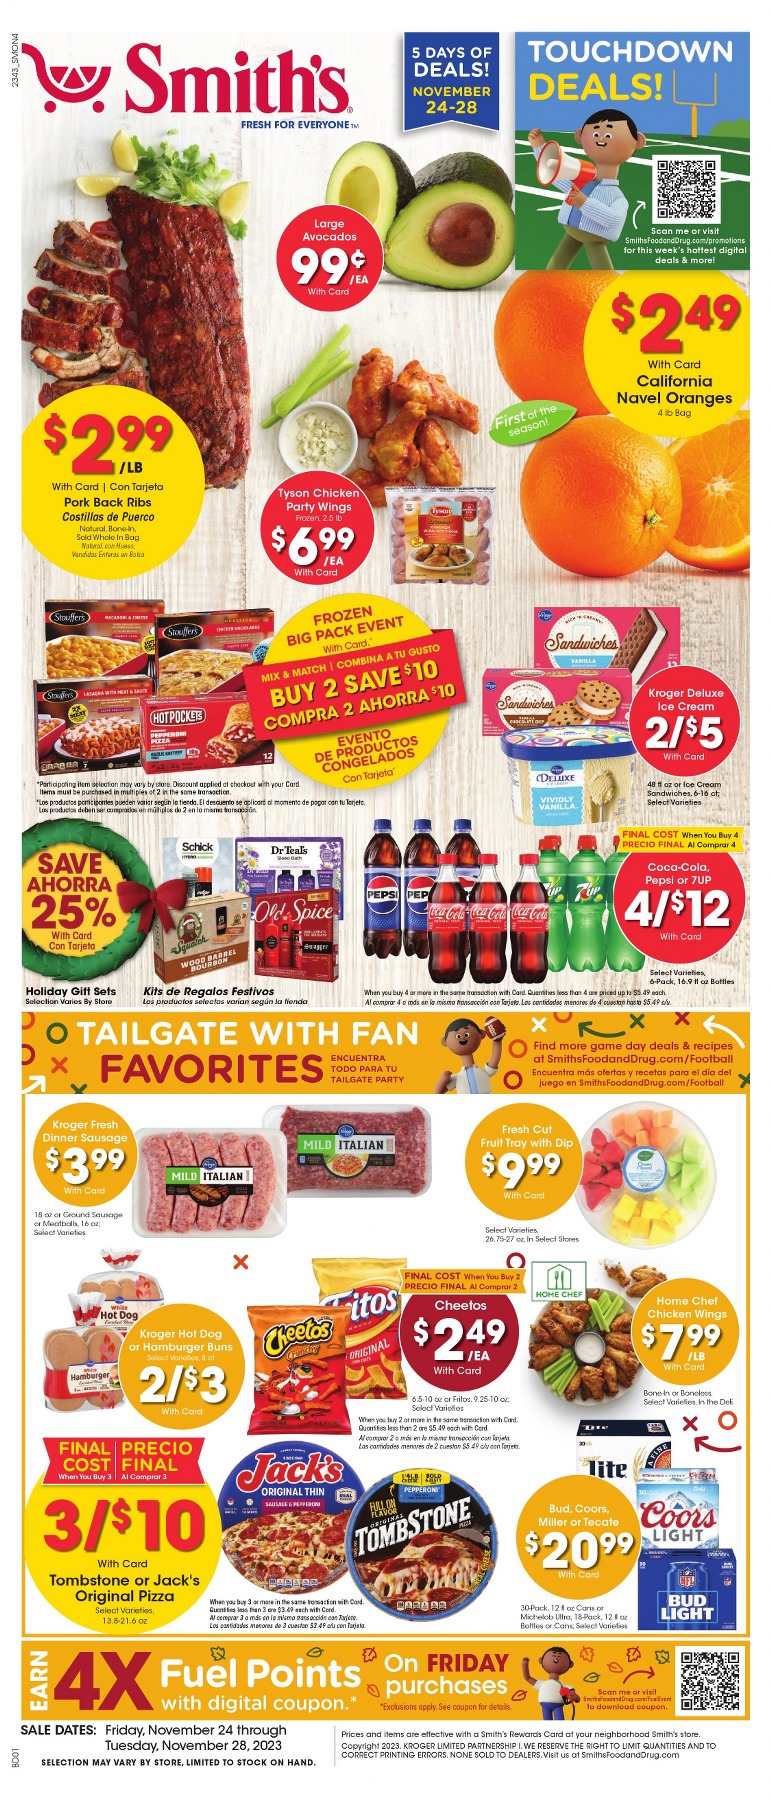 Smith's Black Friday Deals 2023 1 – smiths ad 1 2